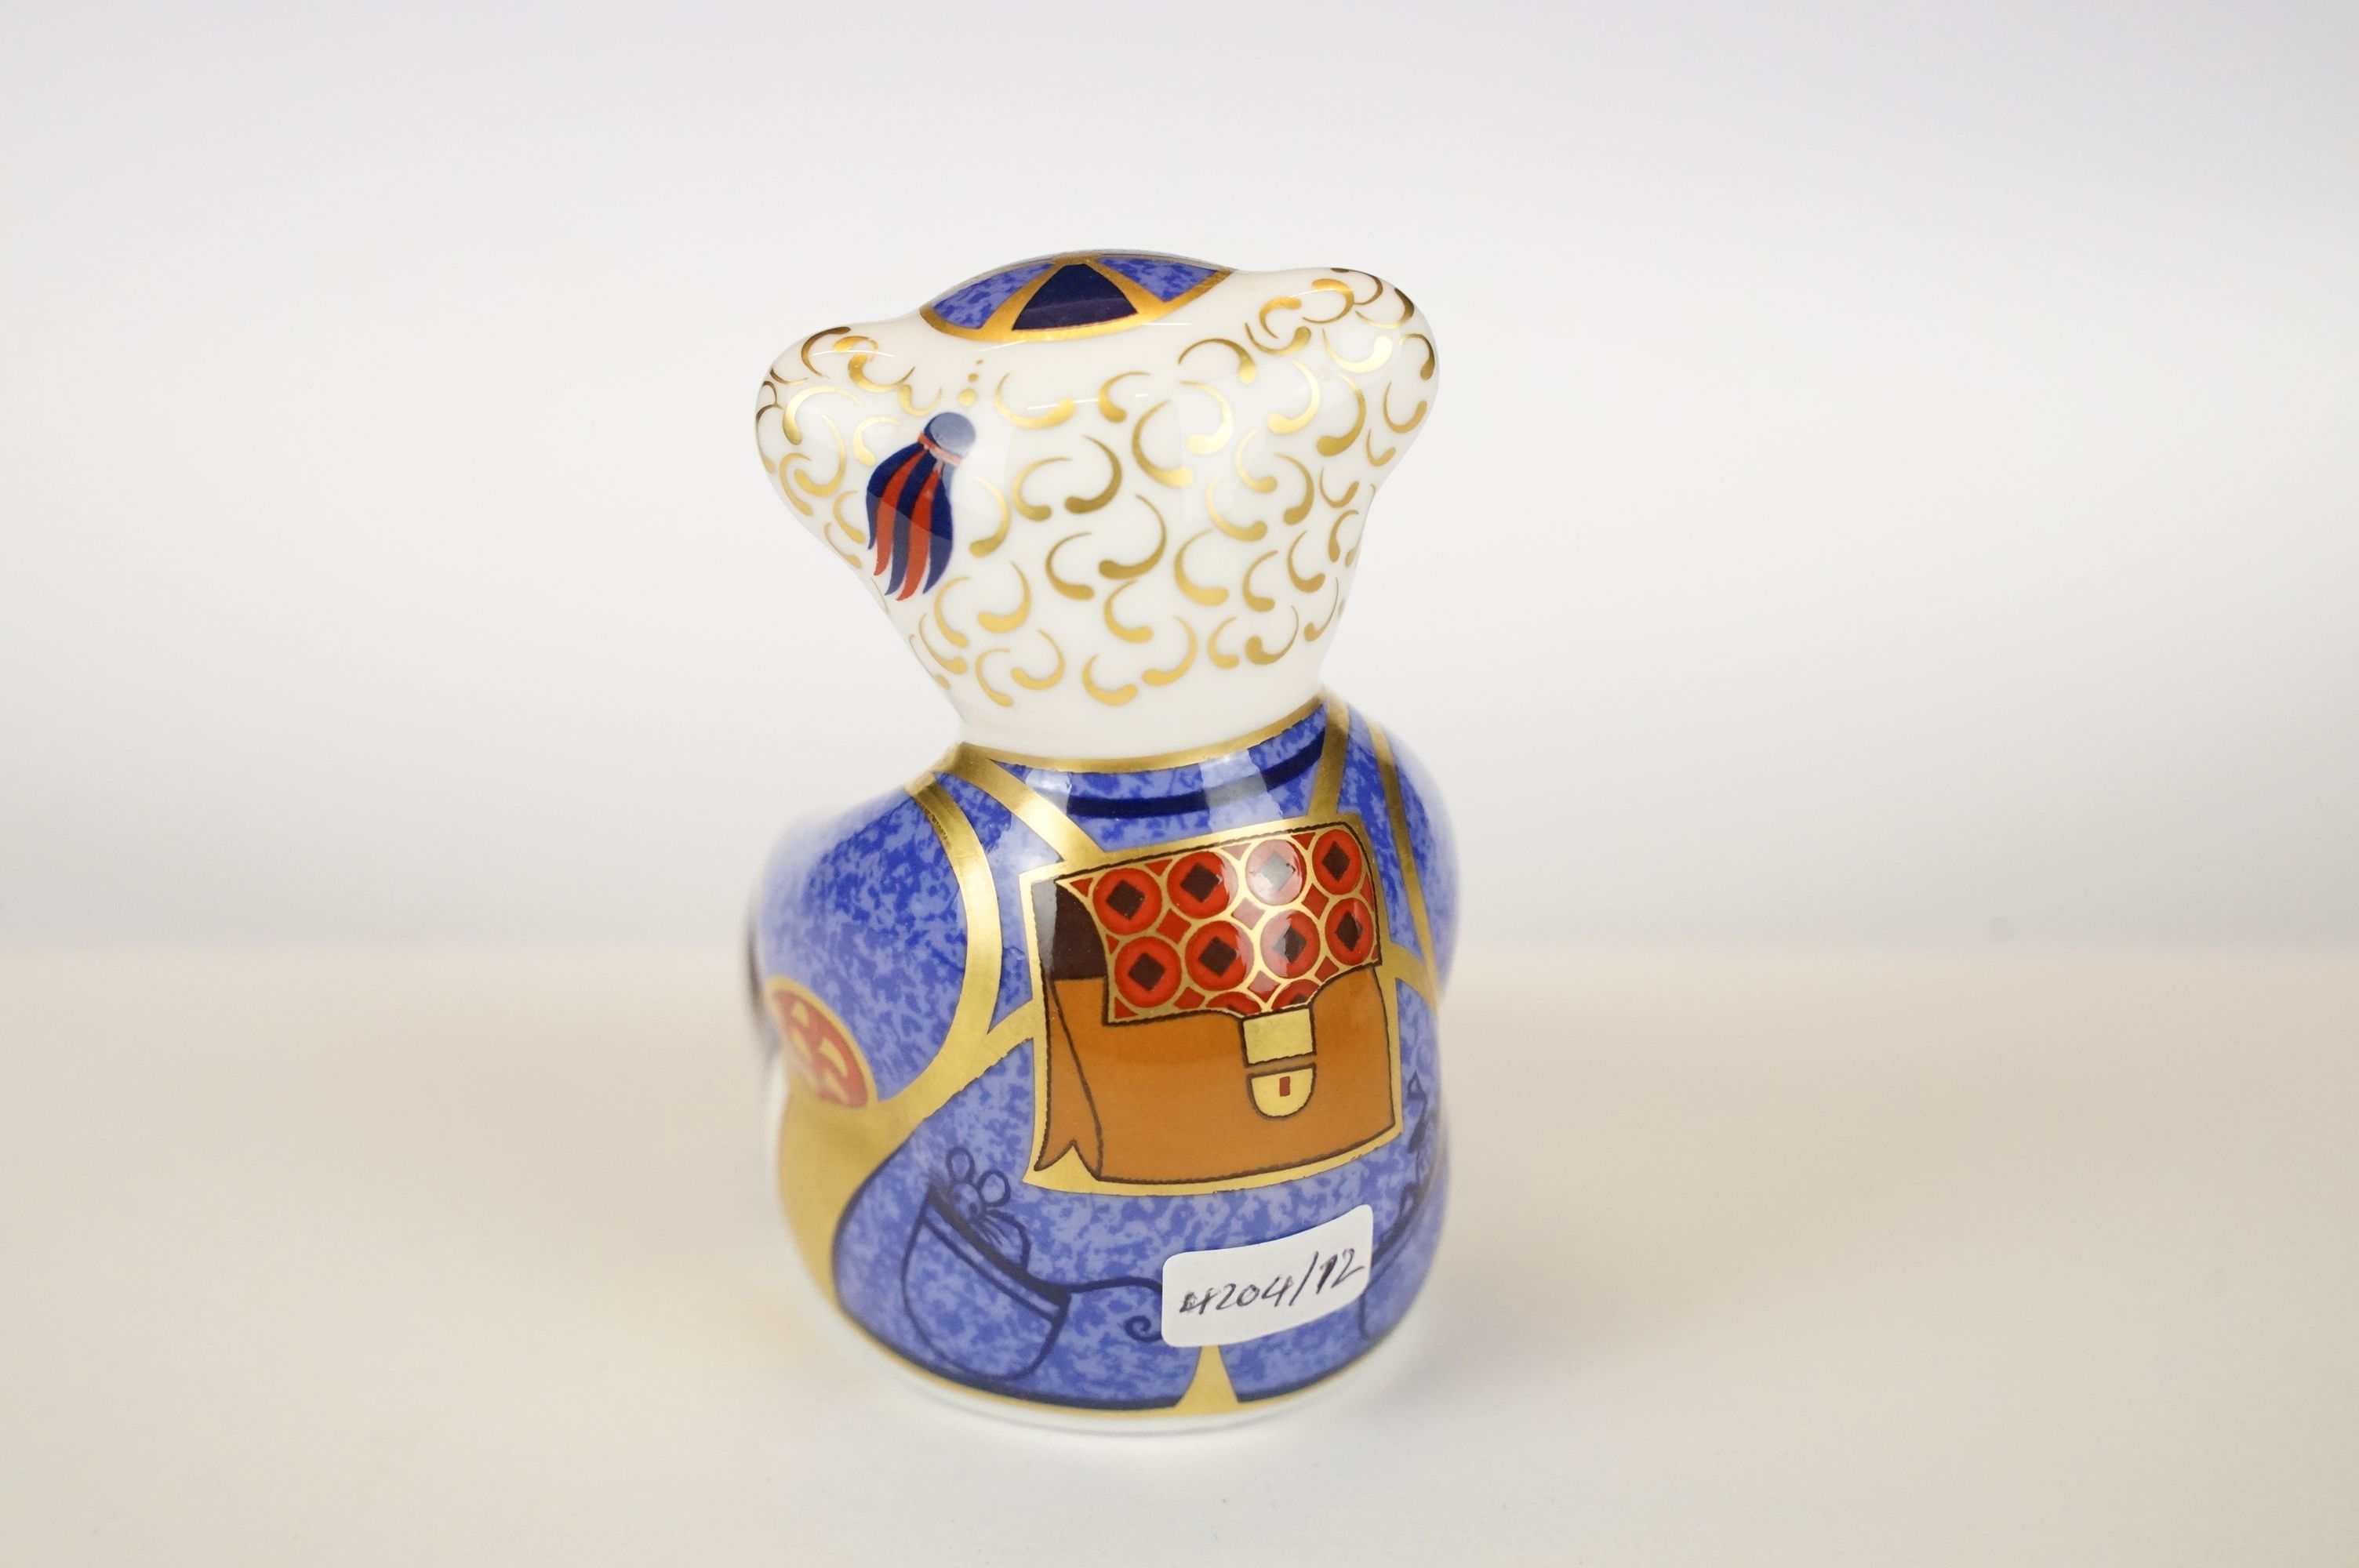 Royal Crown Derby Schoolboy Teddy paperweight, with gold stopper, approx 8cm tall - Image 3 of 5